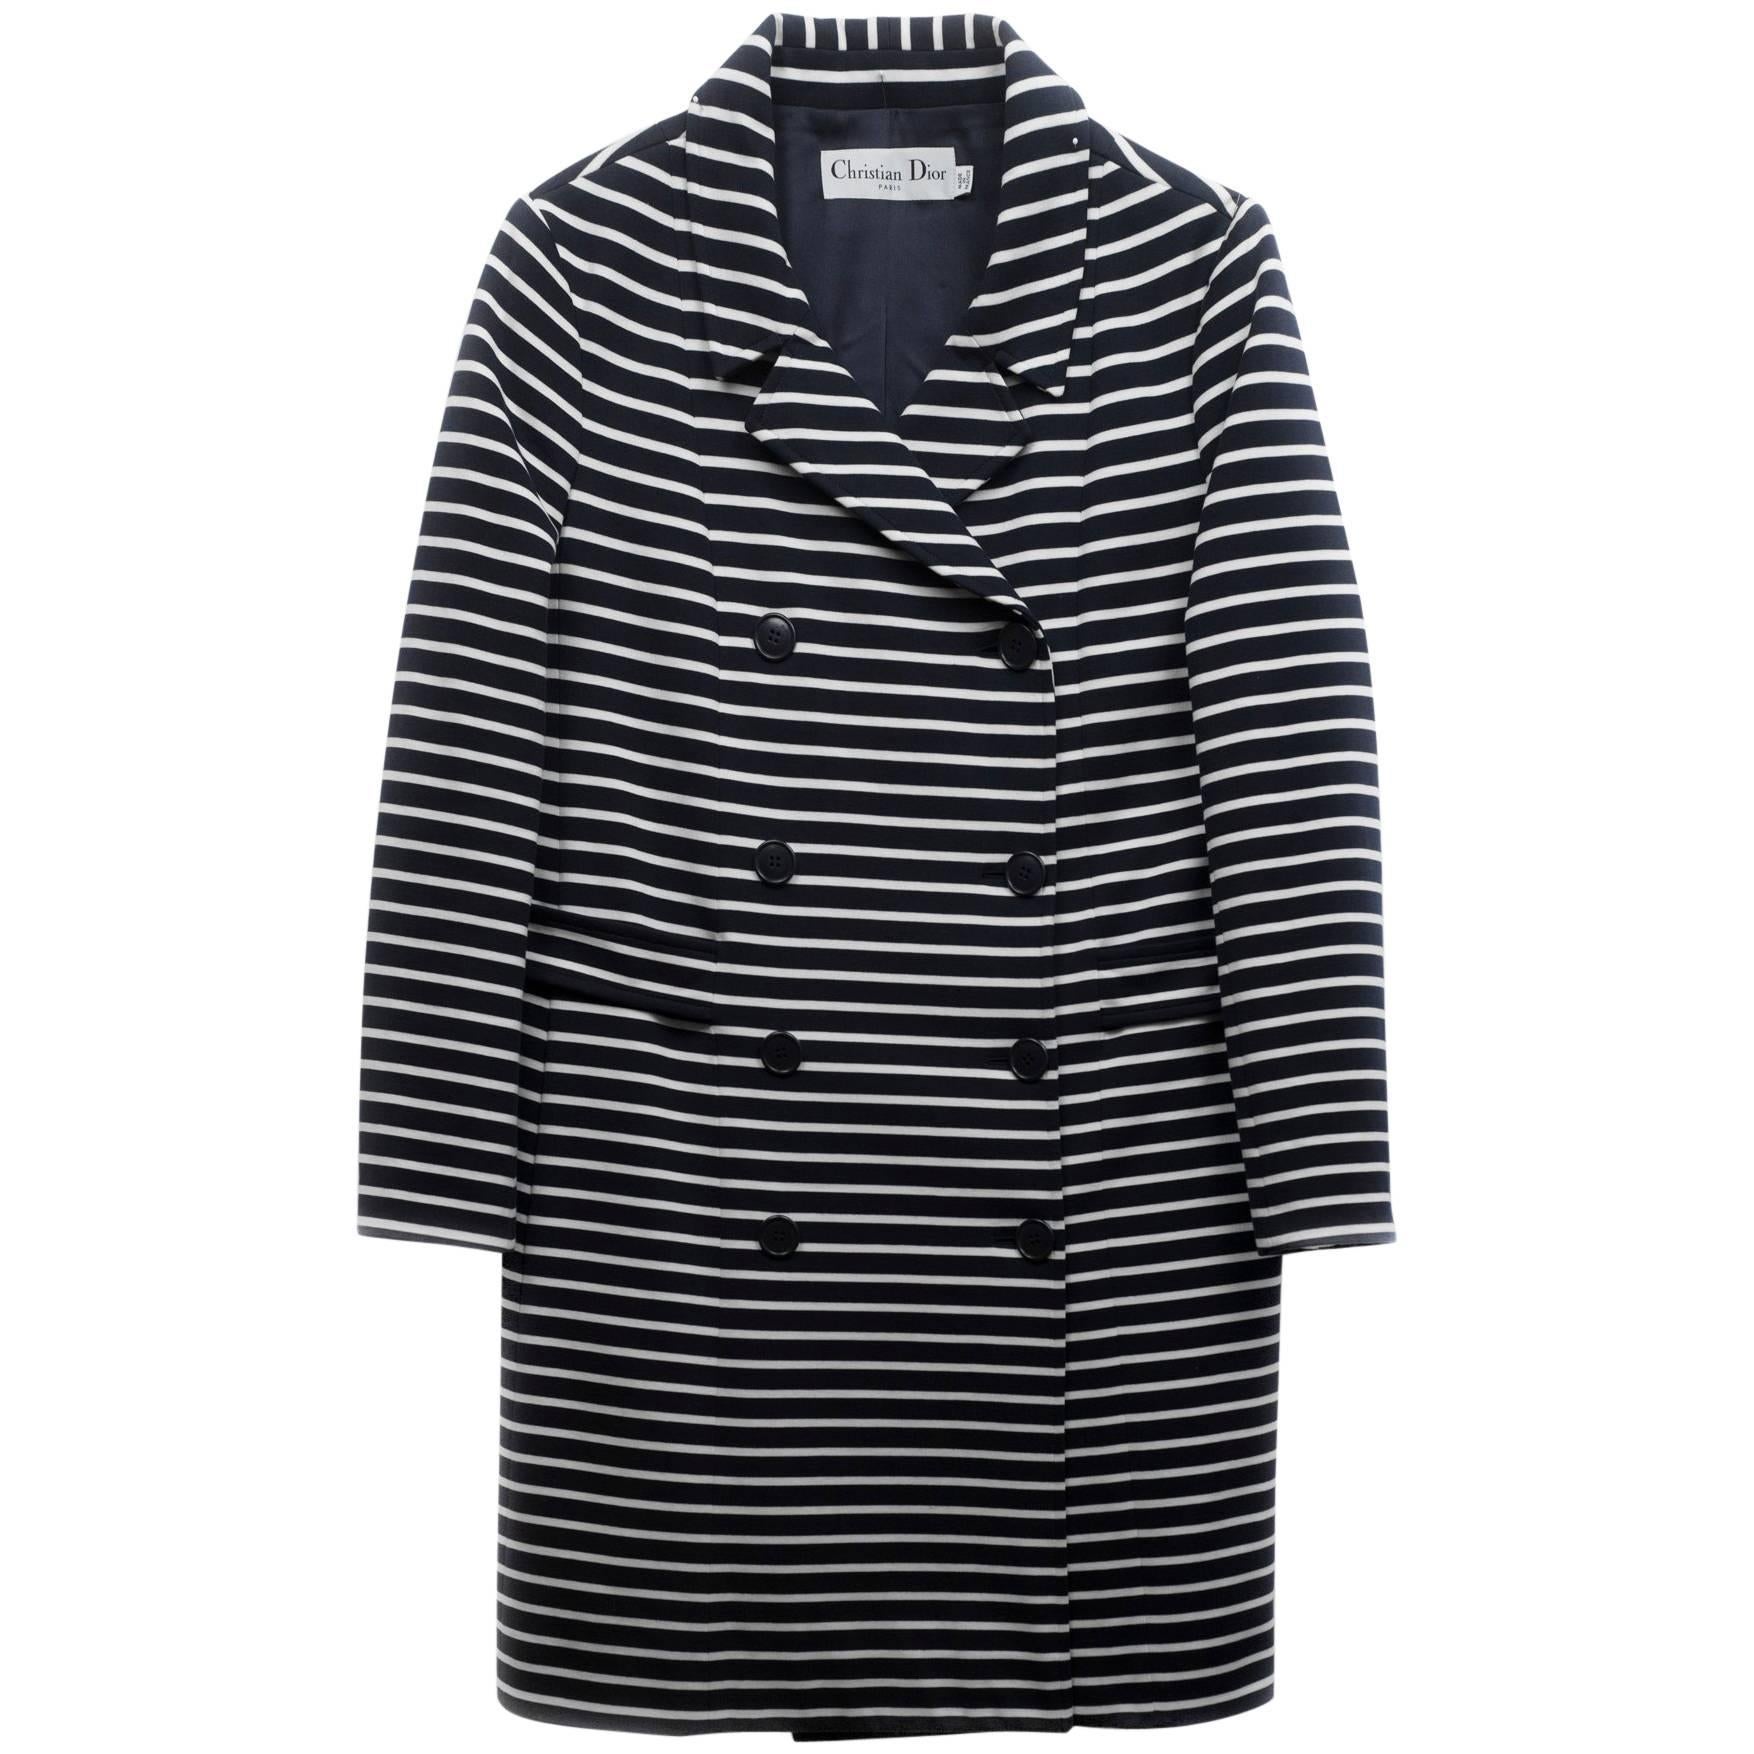 Christian Dior Navy & White Striped Double Breasted Jacket Sz 6